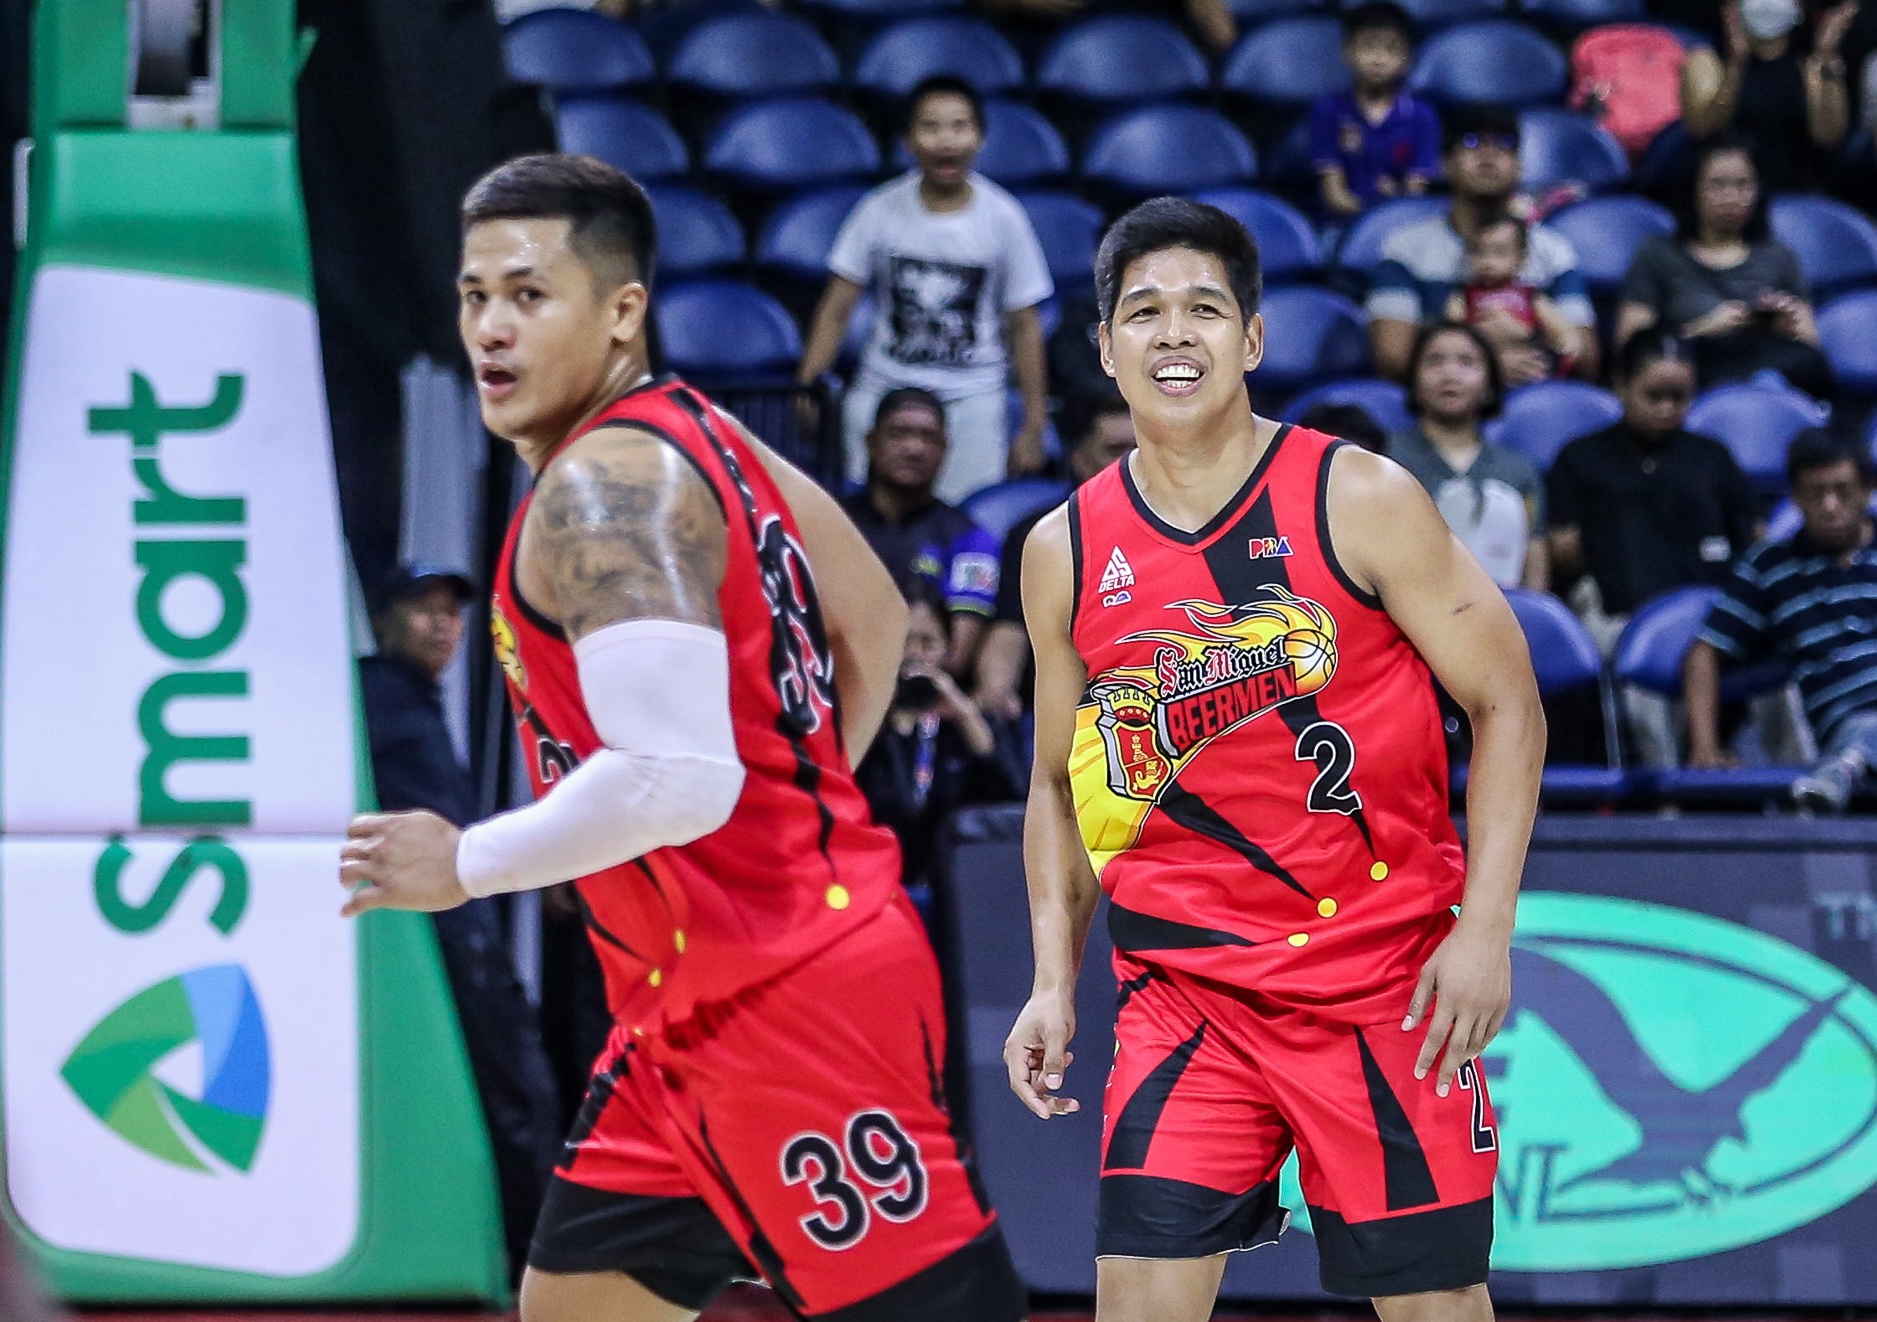 San Miguel Beermen's Don Trollano and Jericho Cruz during a PBA game.